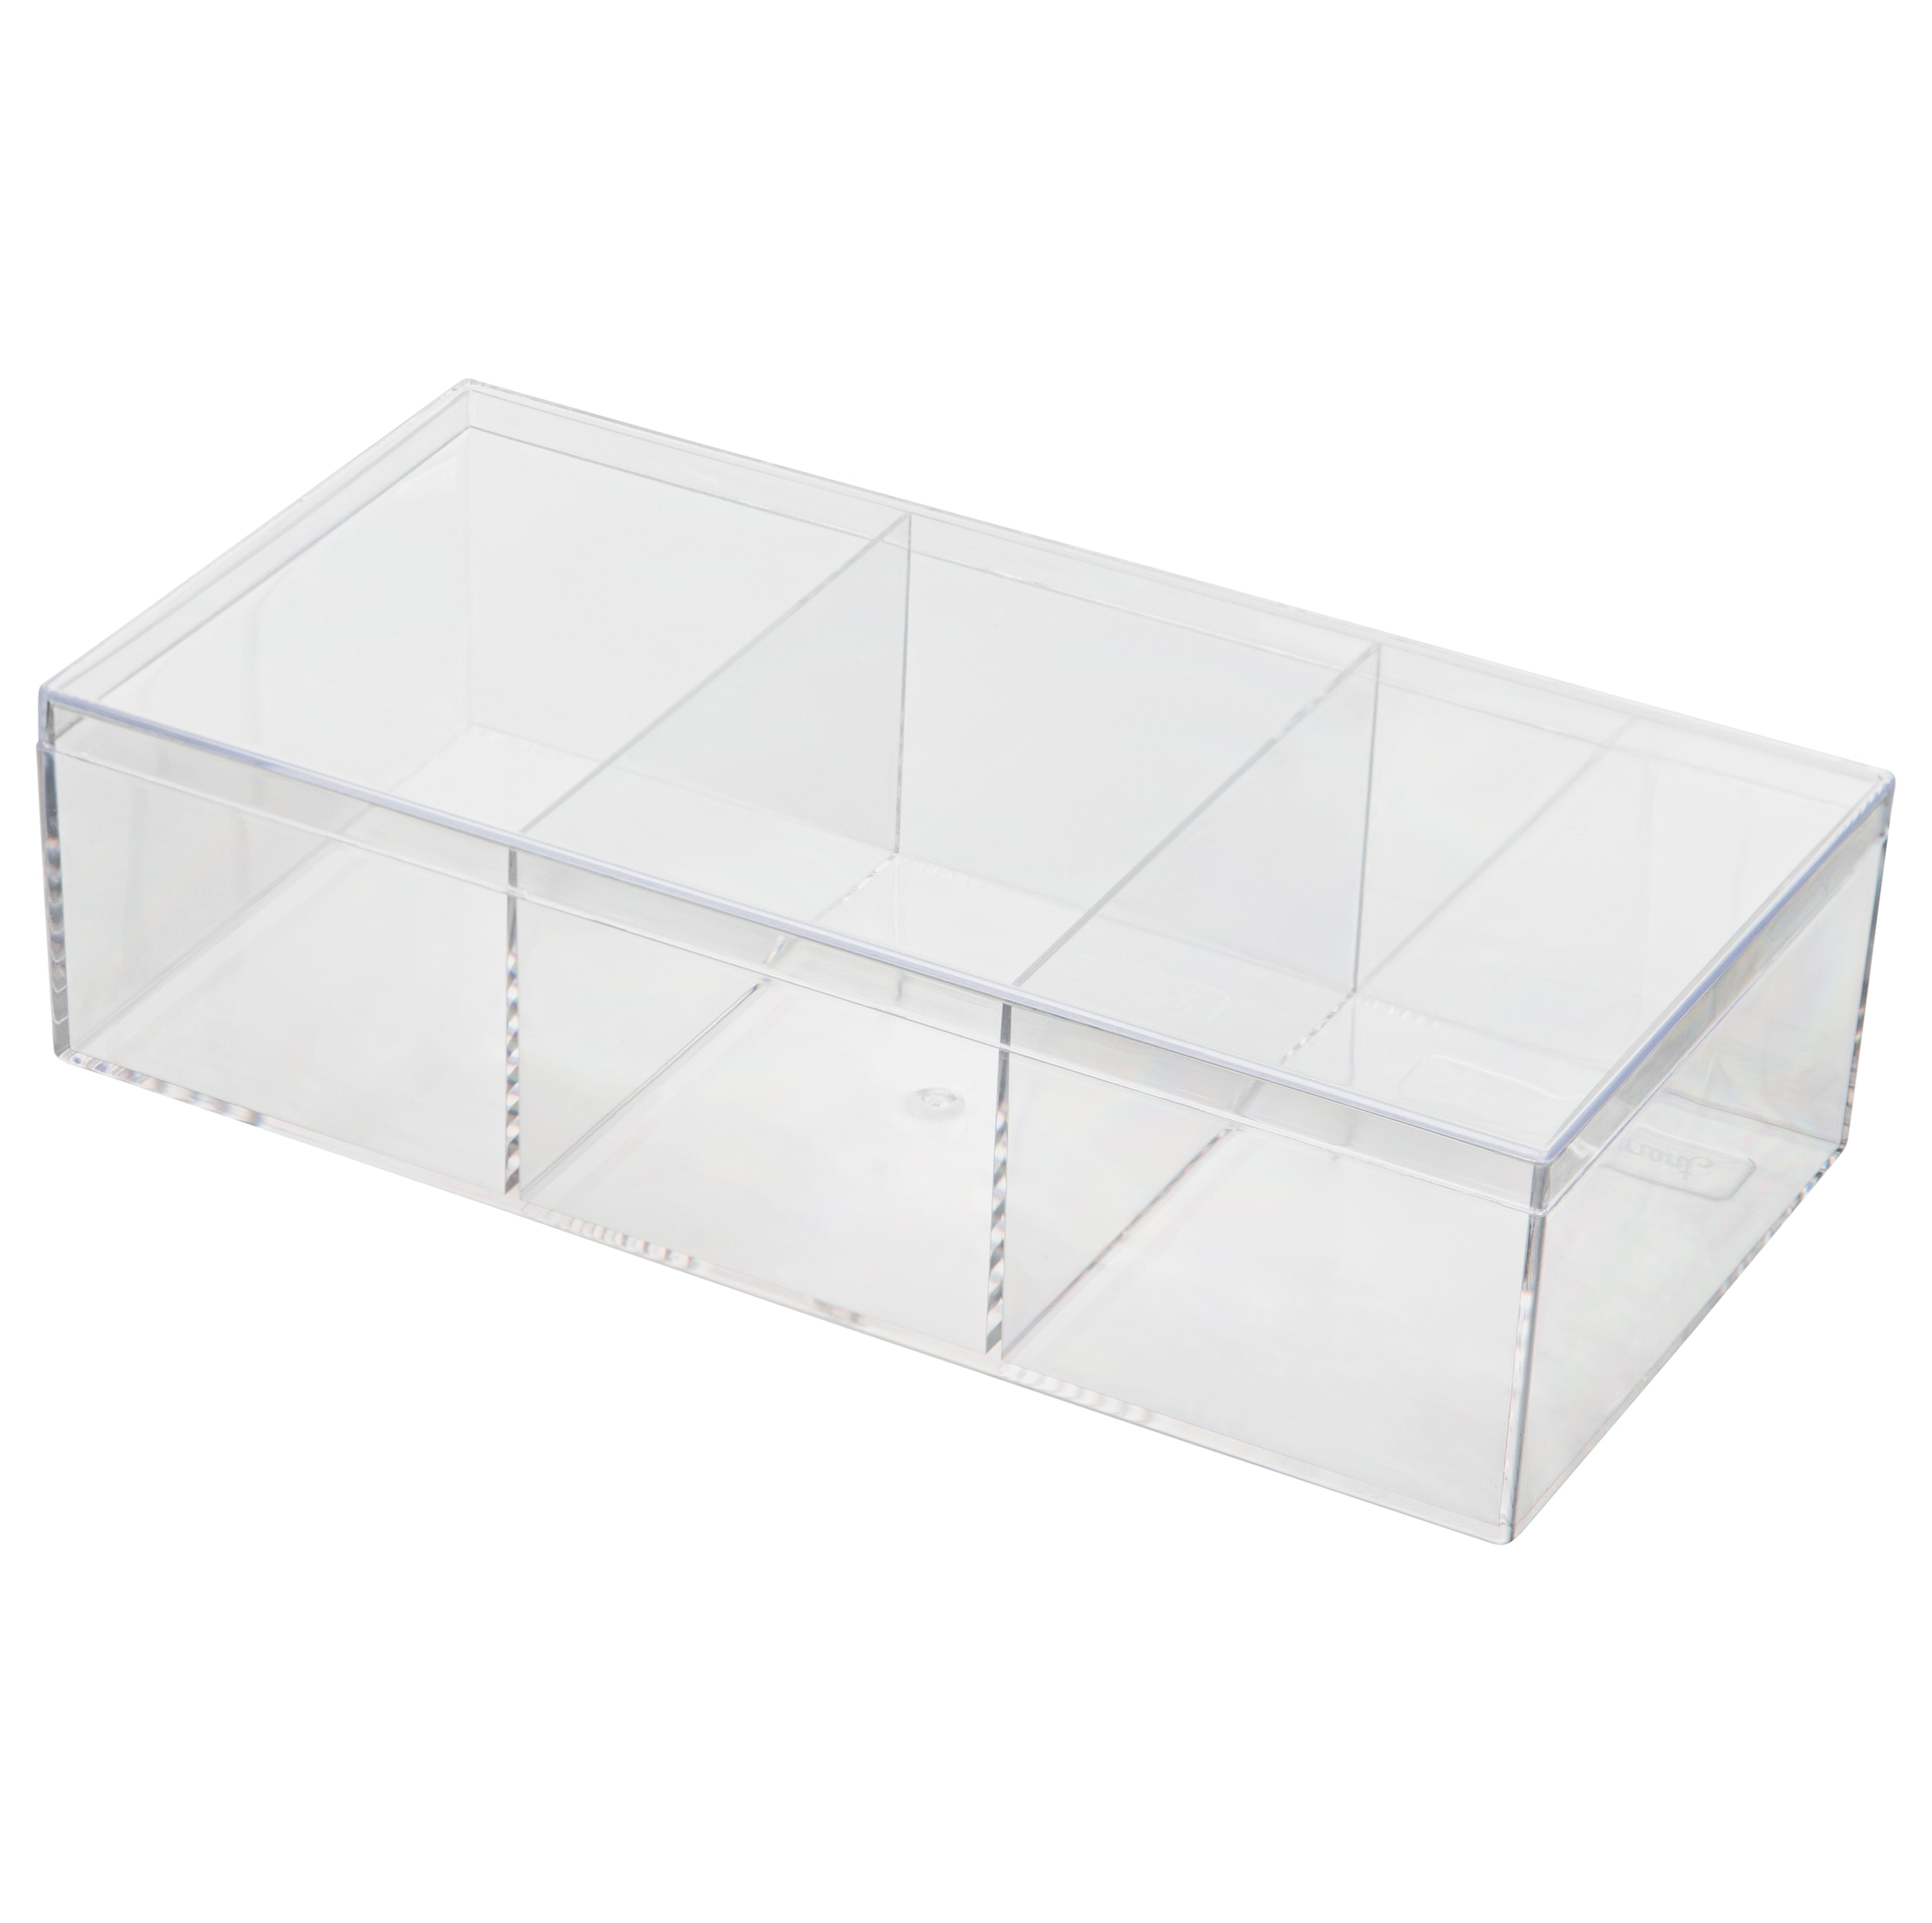 Clear Acrylic Boxes 4 Pack 7.5X3.75X2 Three Sectional